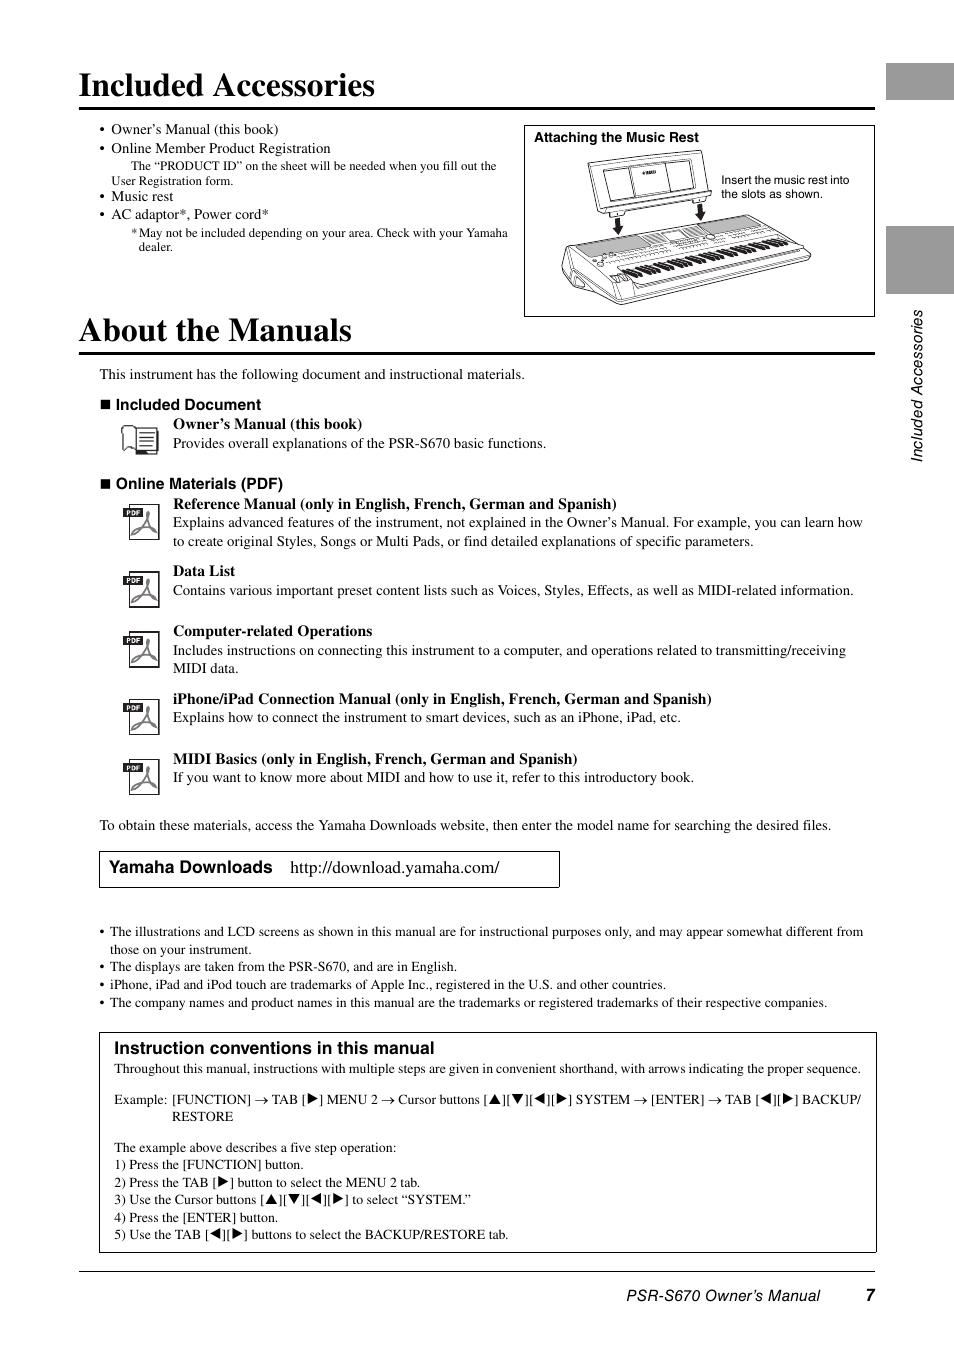 Included accessories, About the manuals | Yamaha PSR-S670 User Manual